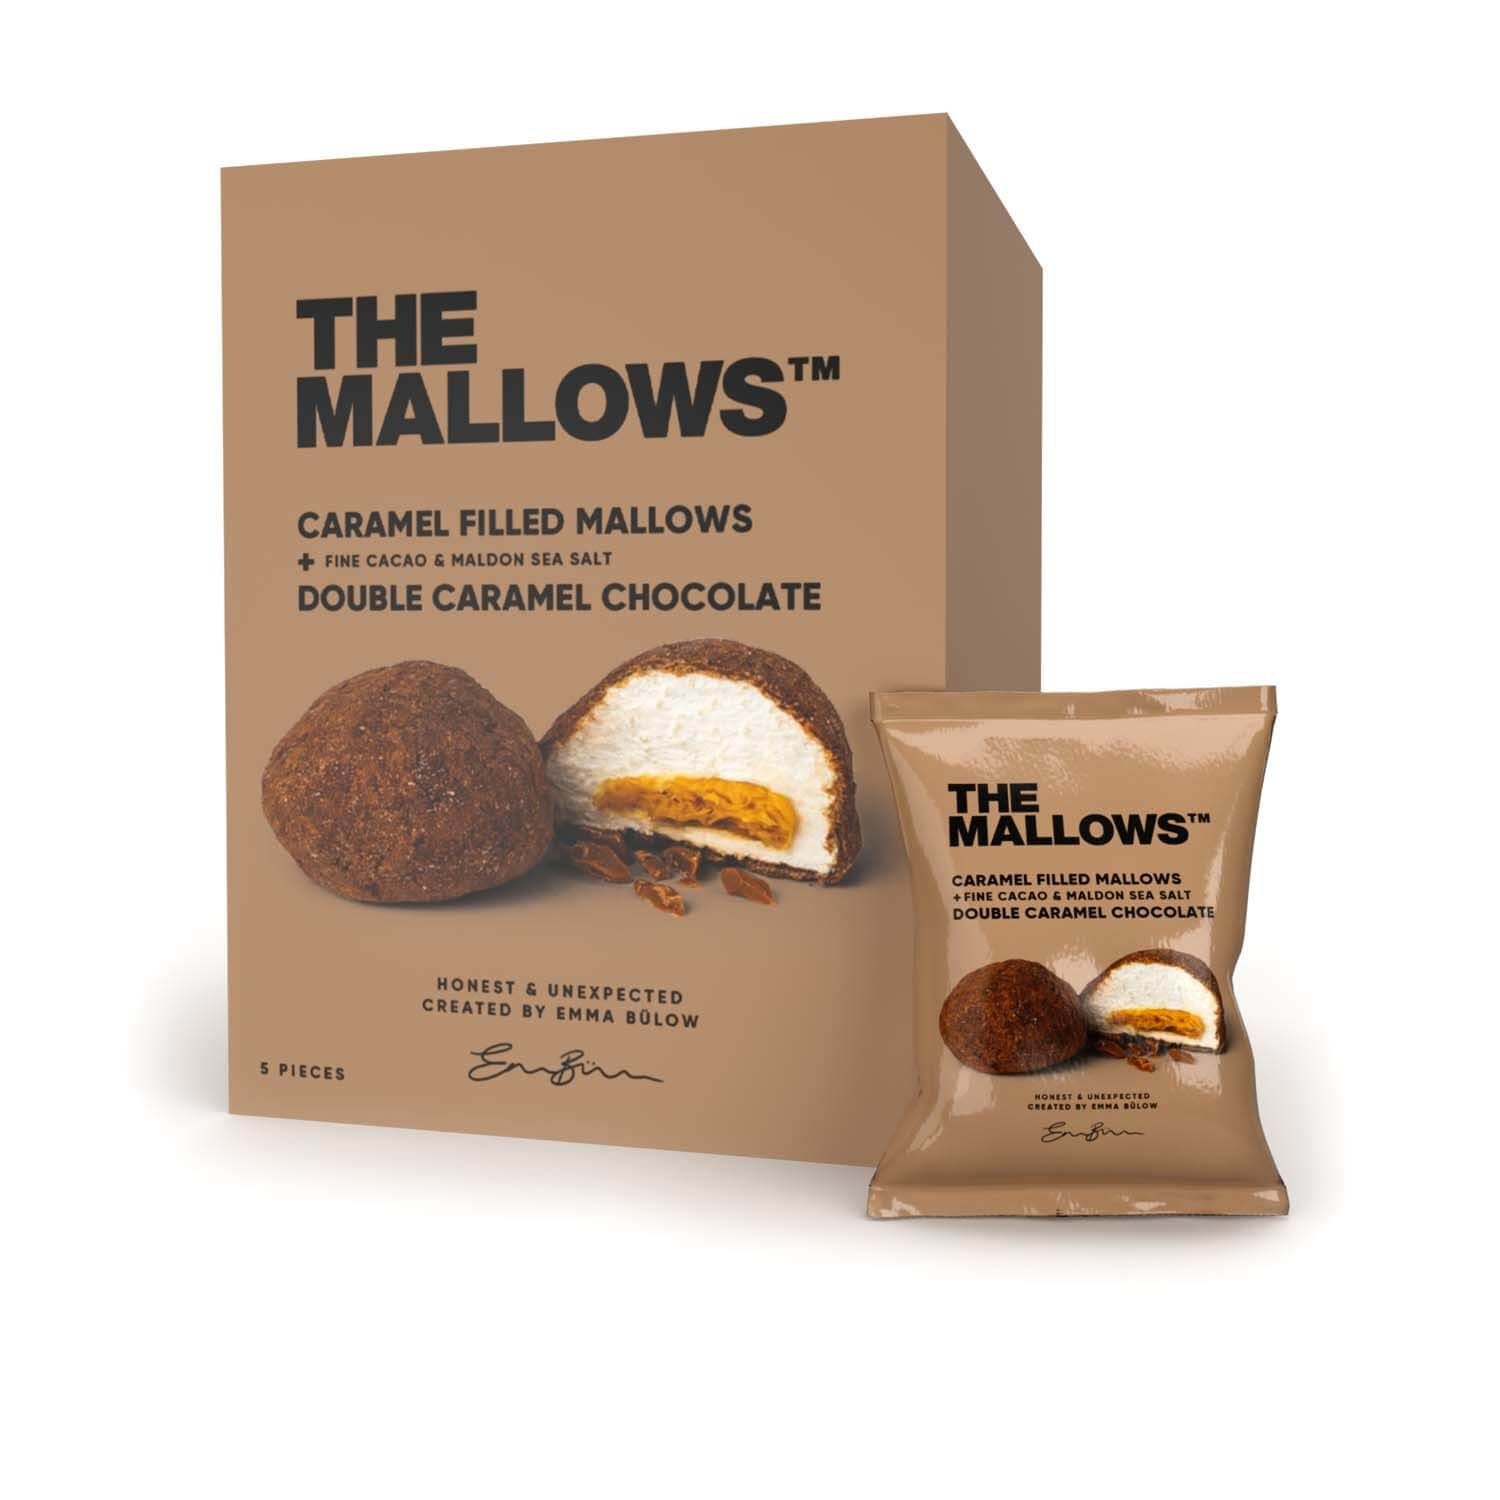 The Mallows Marshmallows With Caramel Filling & Chocolate Double Caramel Chocolate, 90g